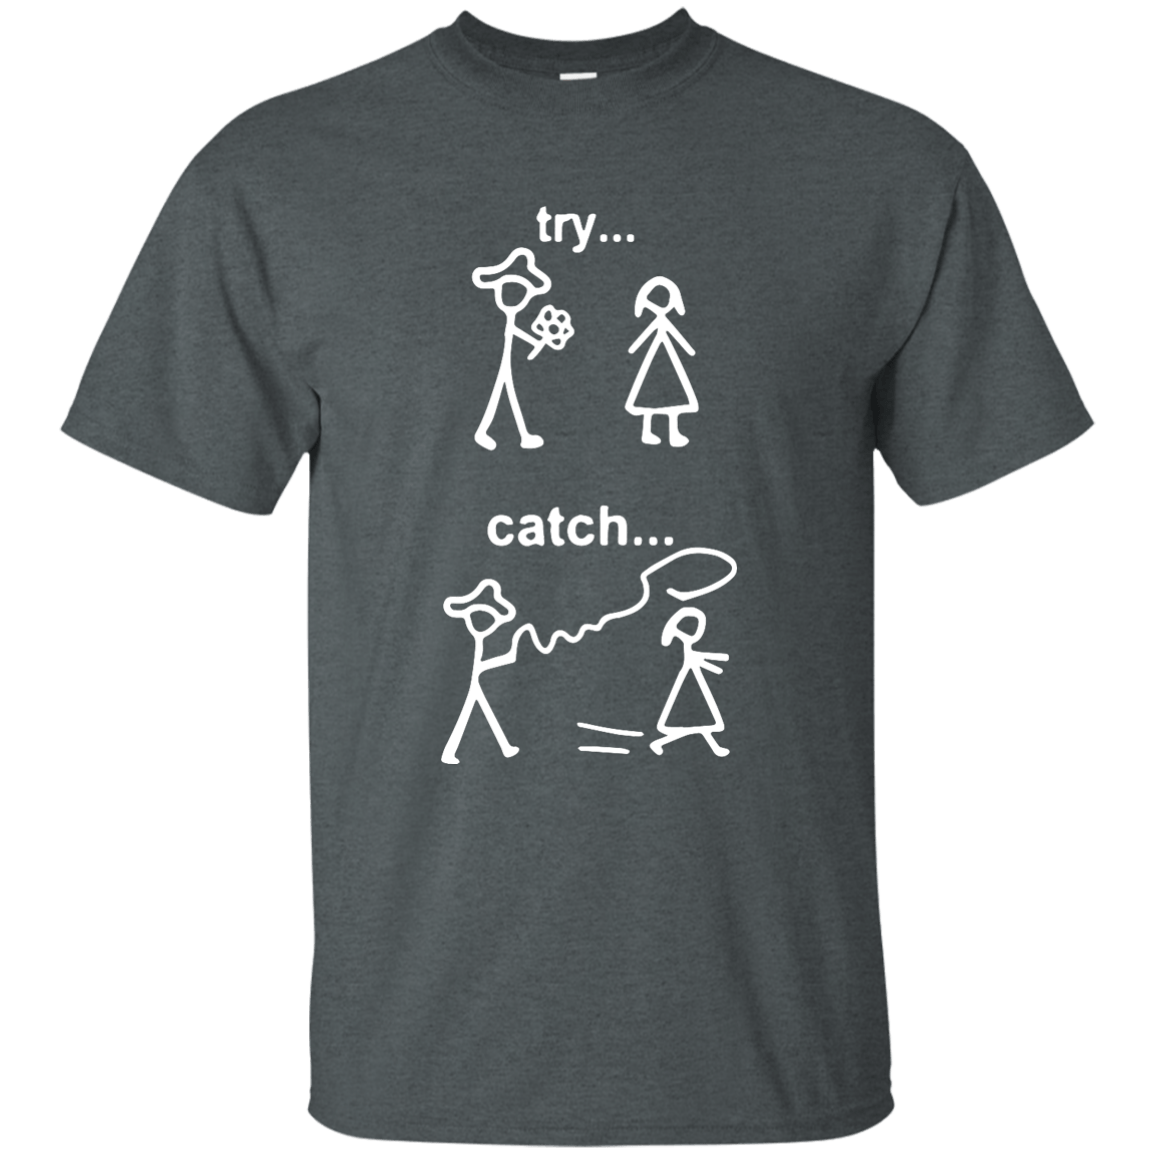 Programming No. catch Tee++ in | try T-Shirts 1 –